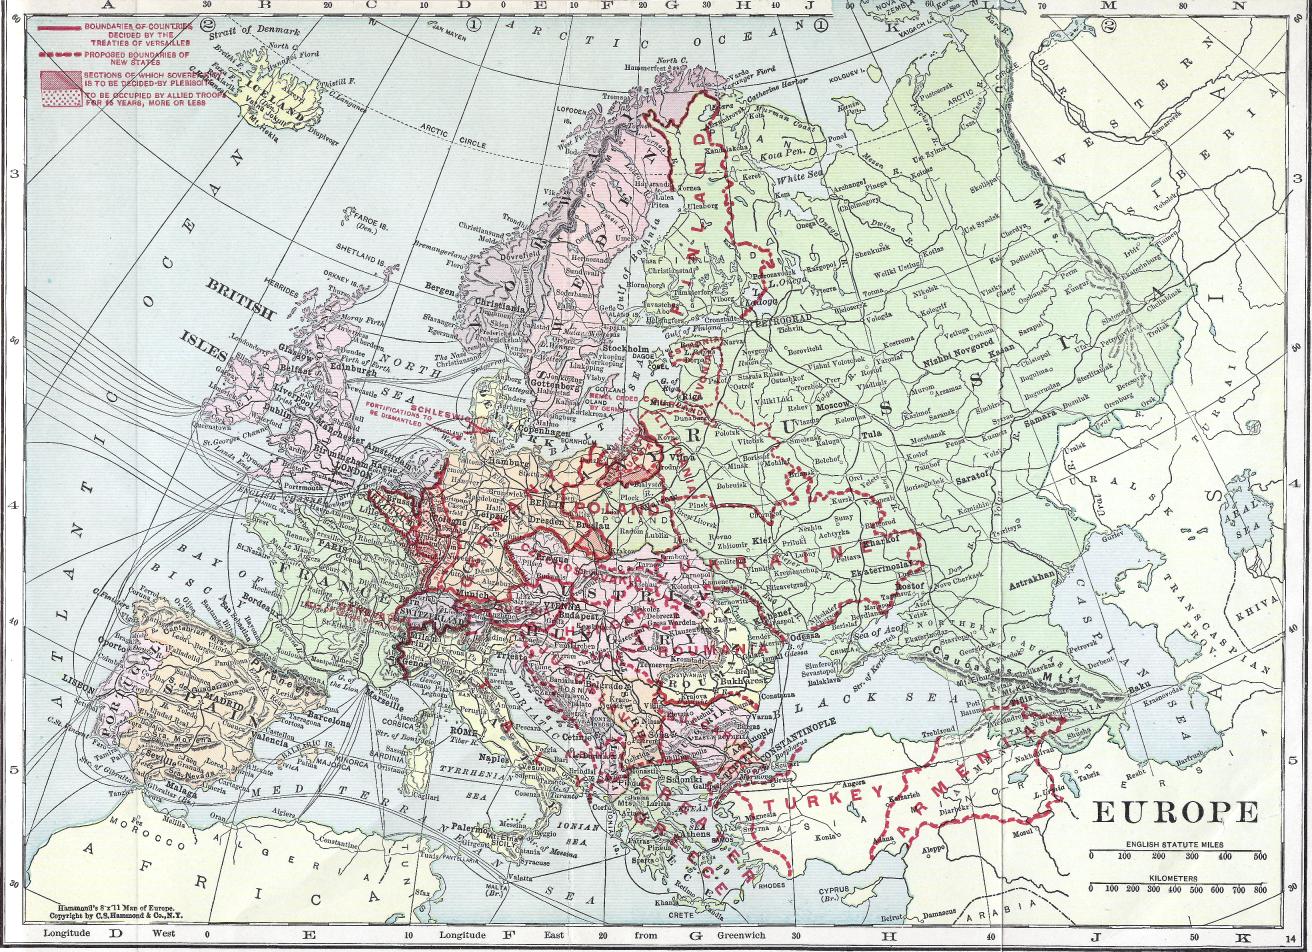 [Map of Europe.]